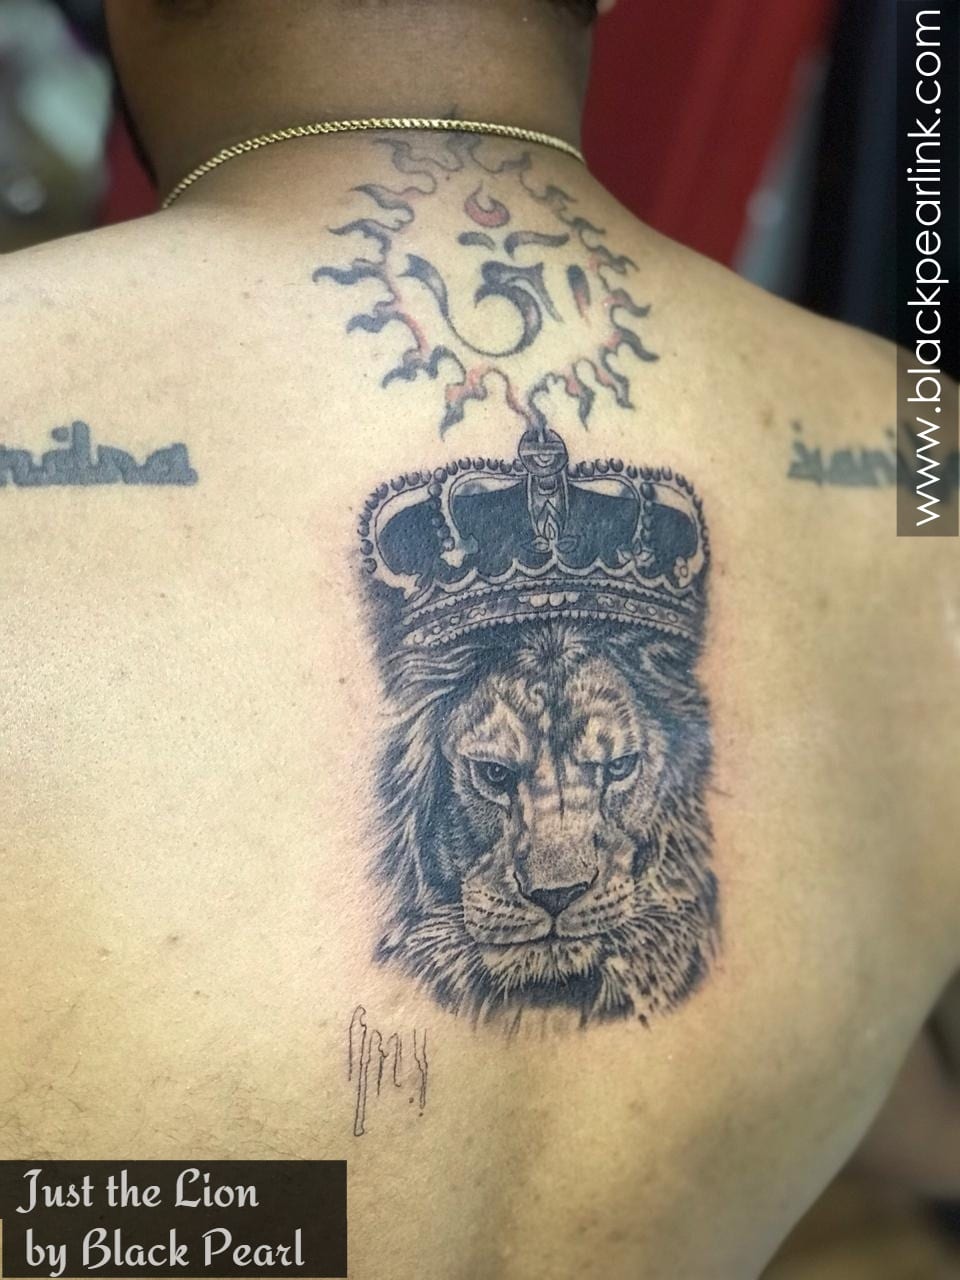 Tattoo uploaded by Chris Frias • From: tattoo-journal.com #Lion #tribal  #chest • Tattoodo